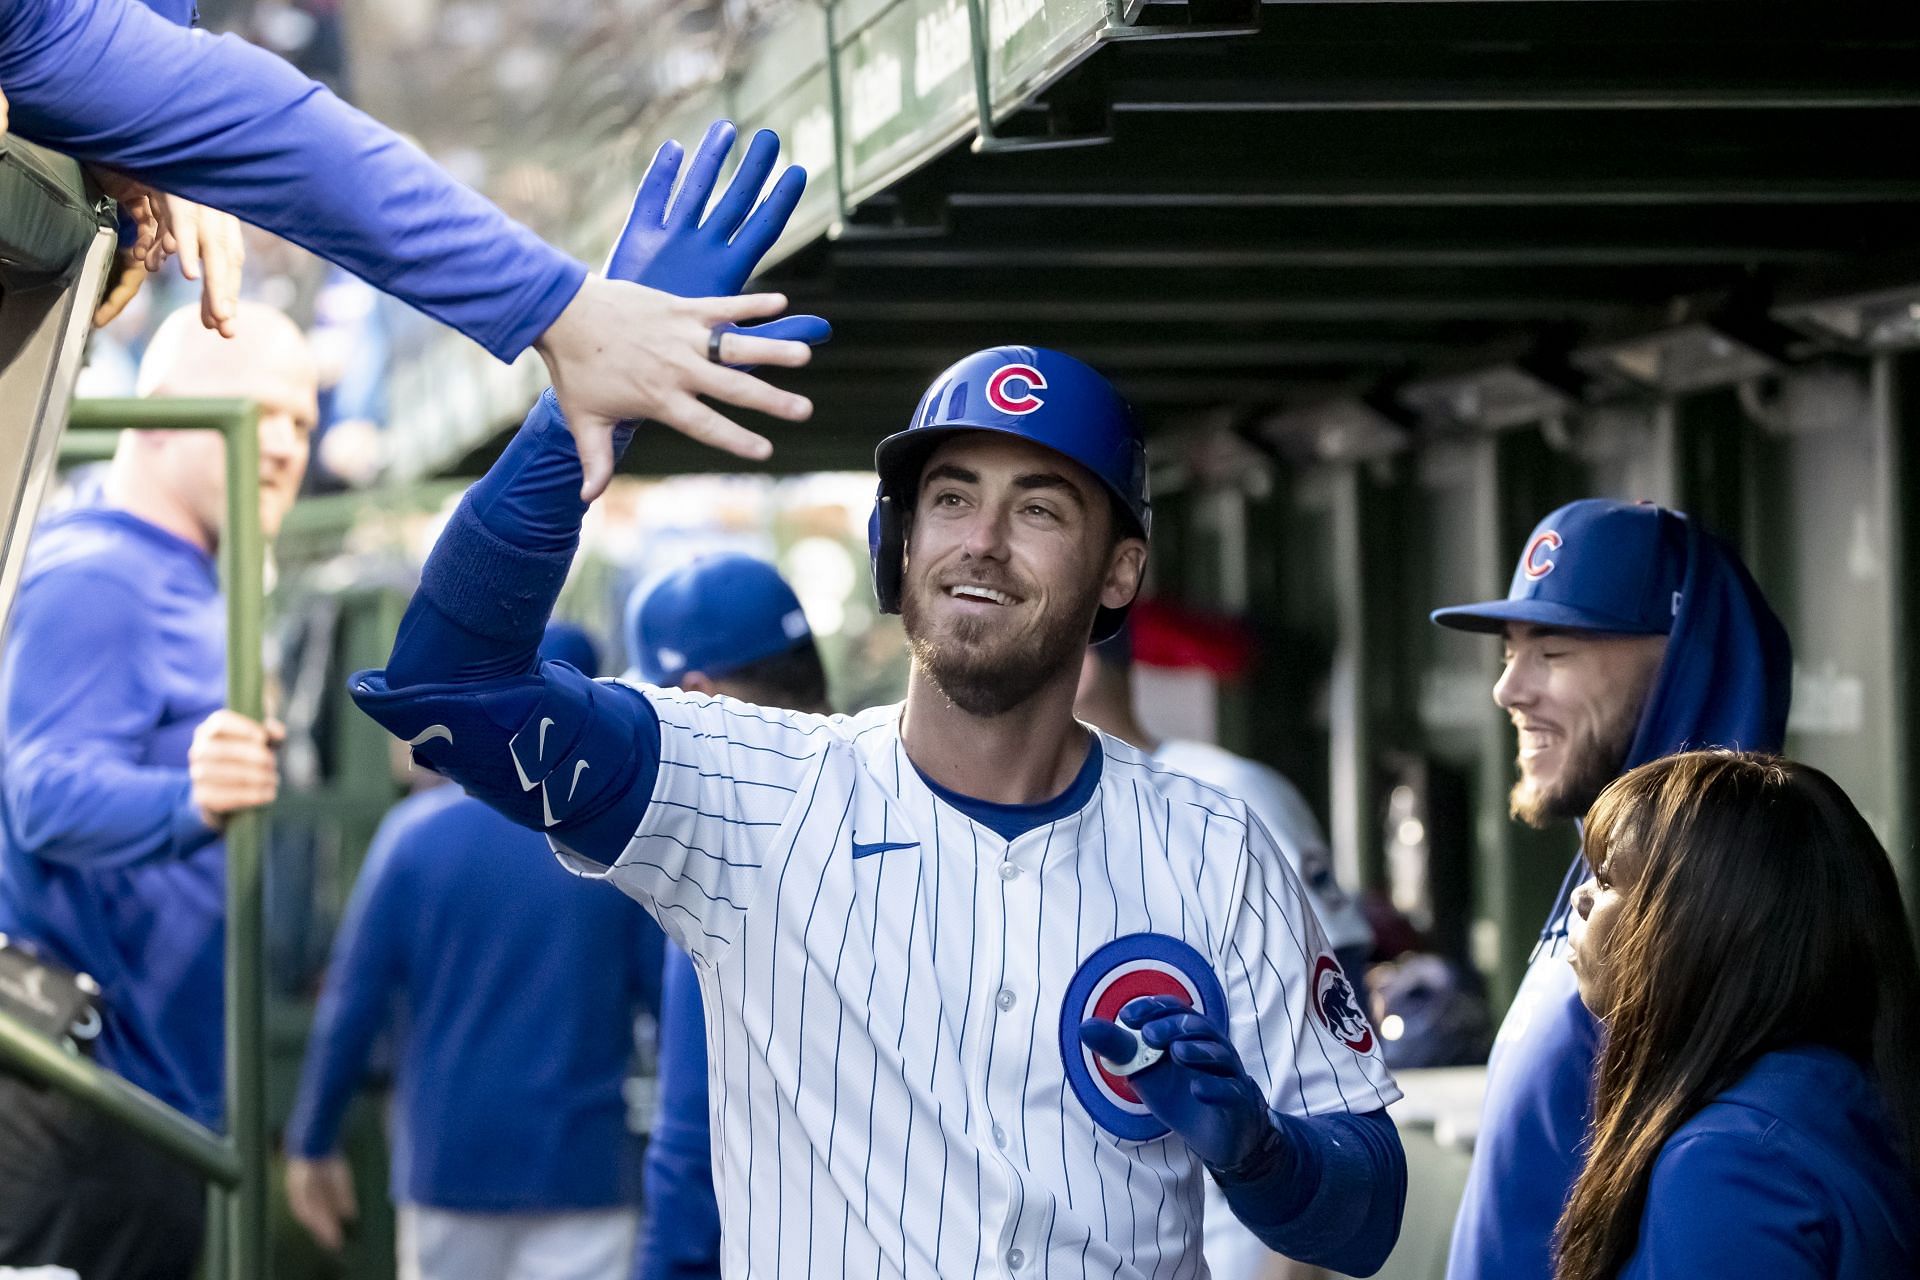 Cody Bellinger signed back with the Cubs